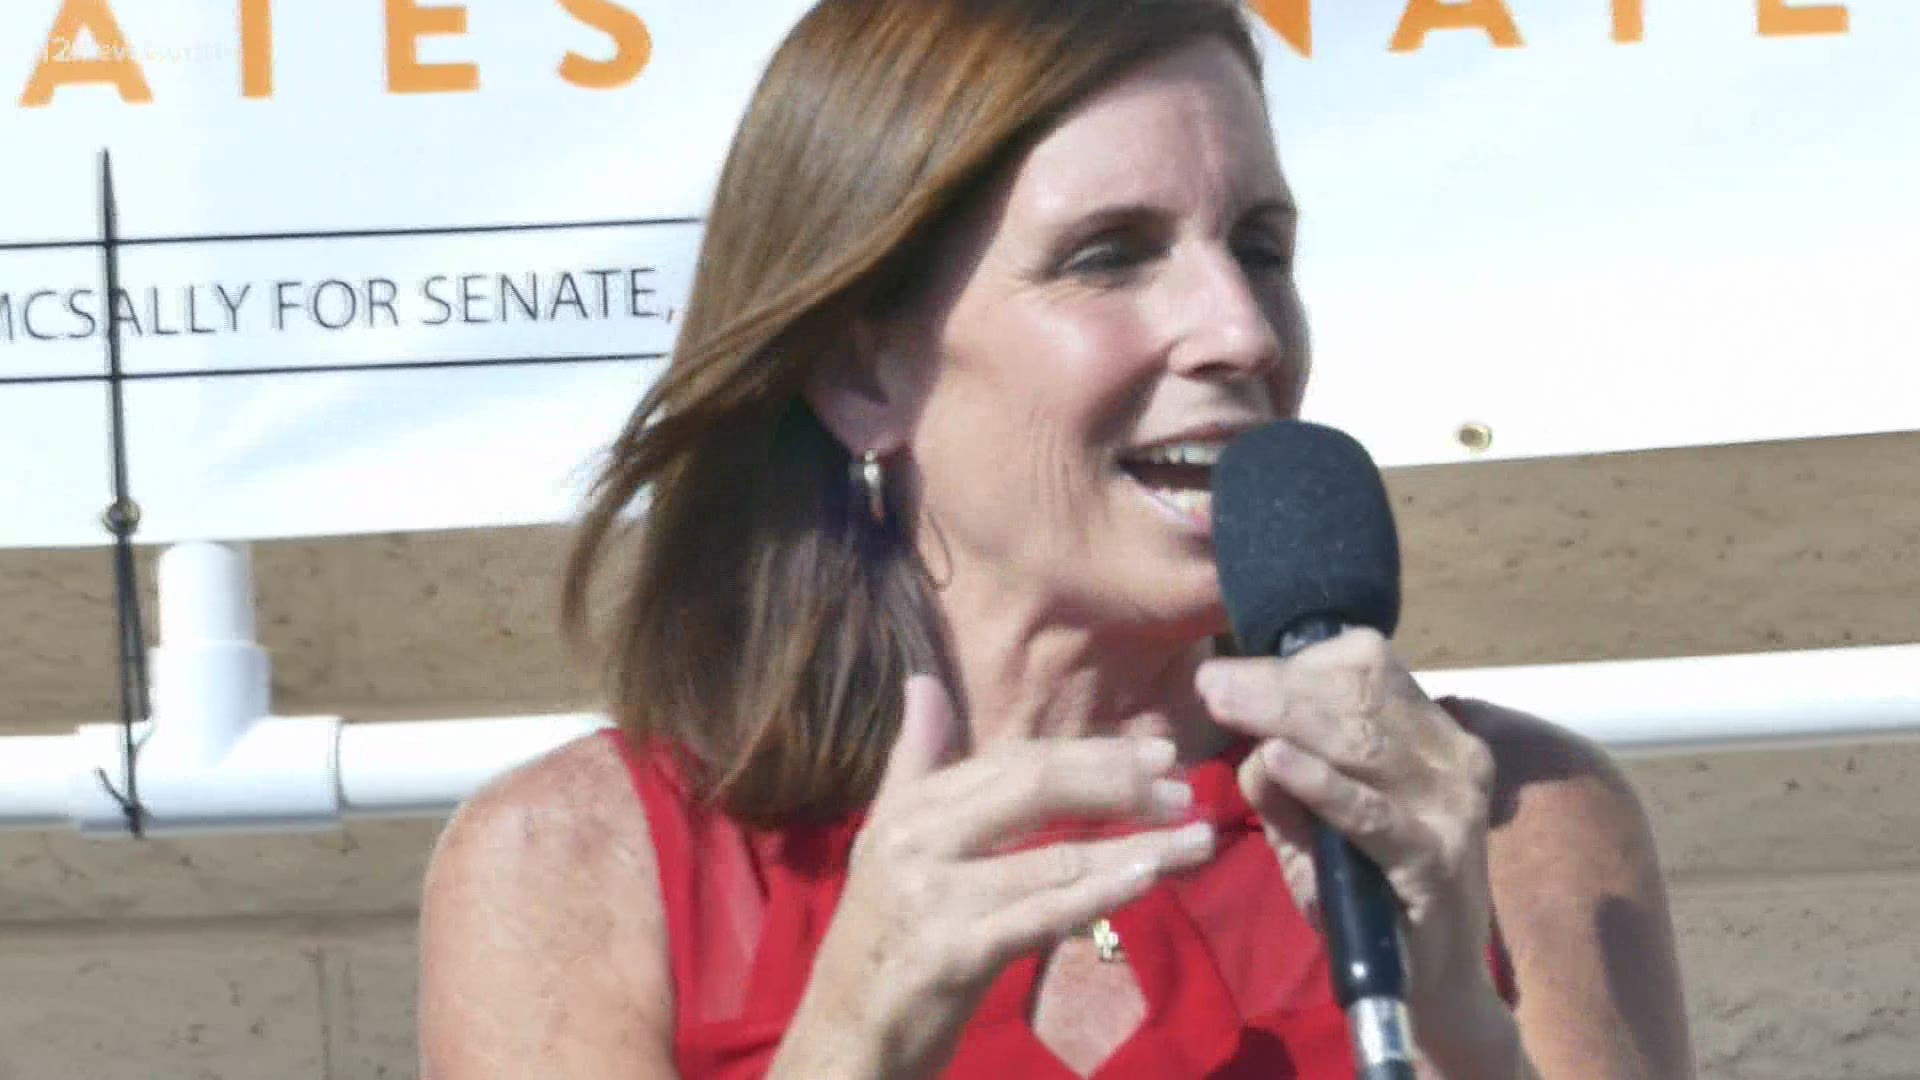 12 News is tracking the heated U.S. Senate special election between Republican Sen. Martha McSally and Democrat Mark Kelly.